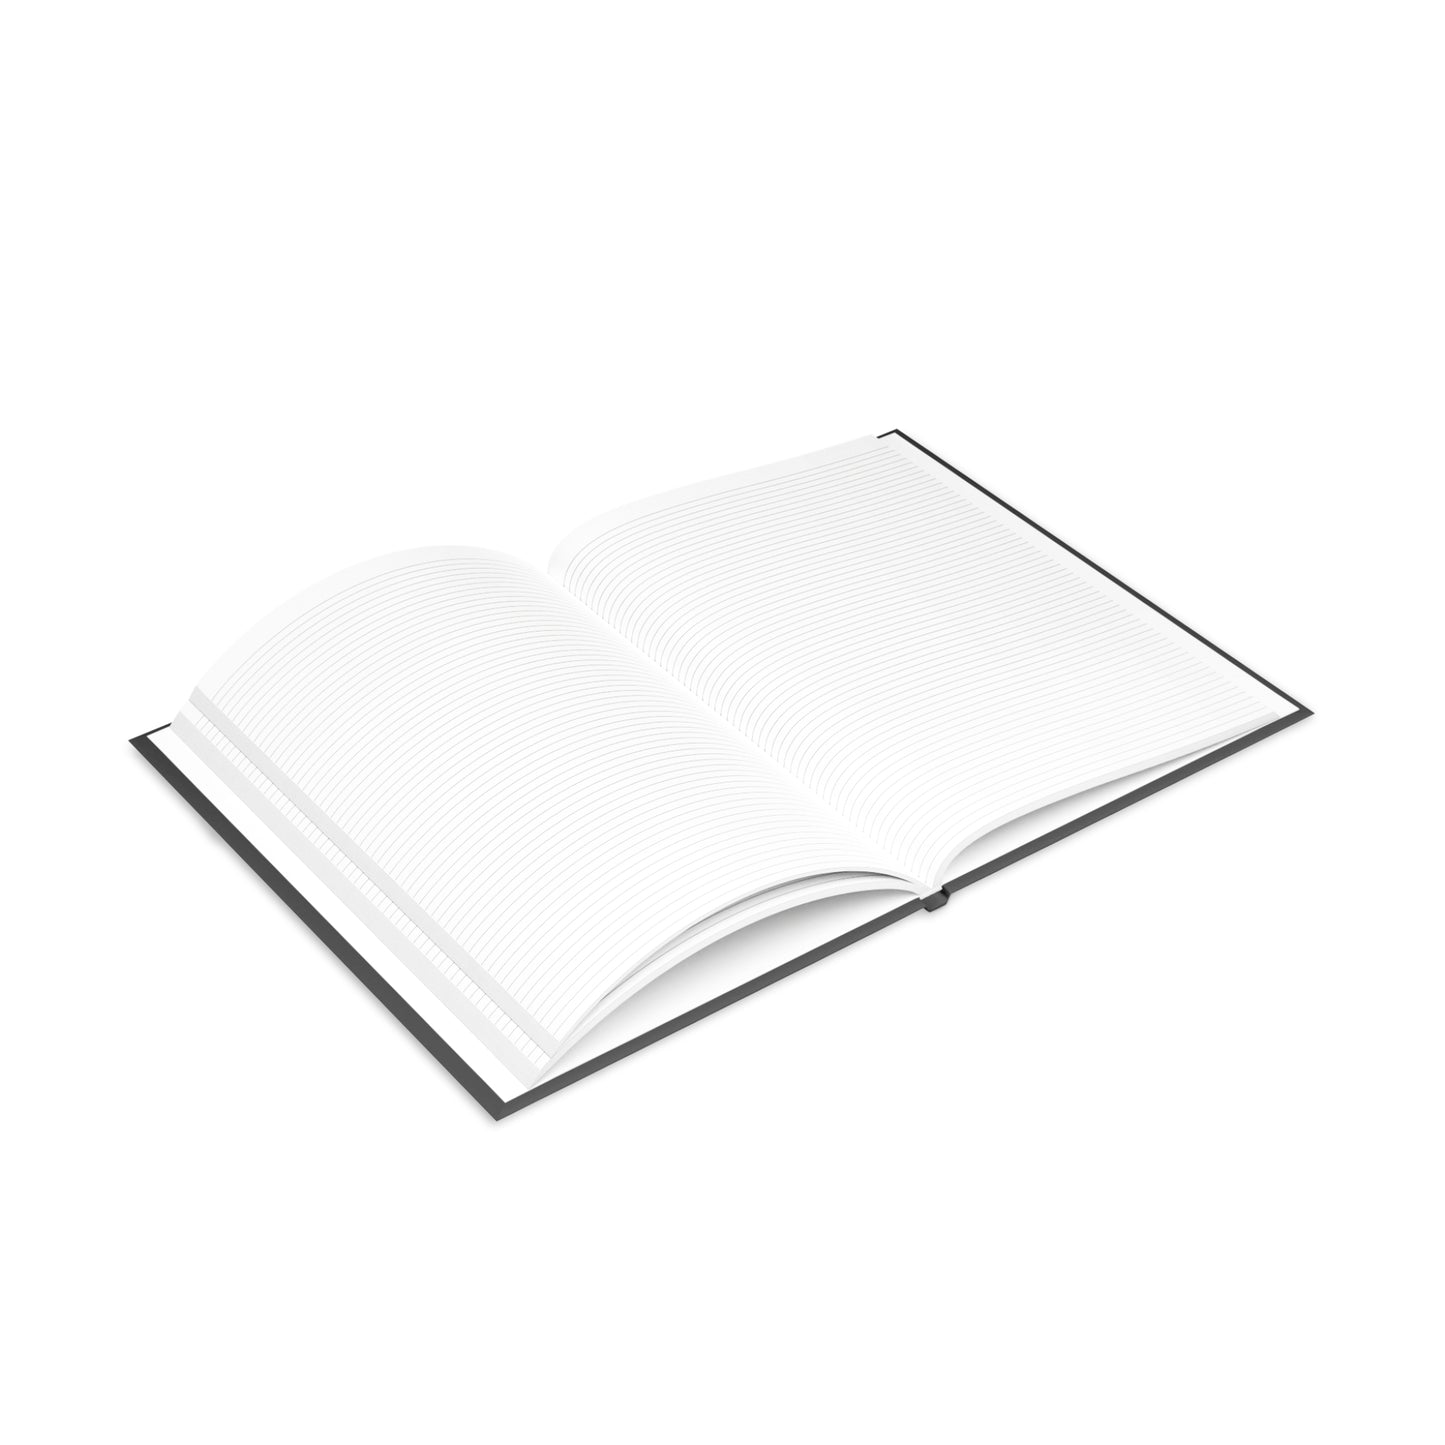 Black Hardcover Notebook with Puffy Covers